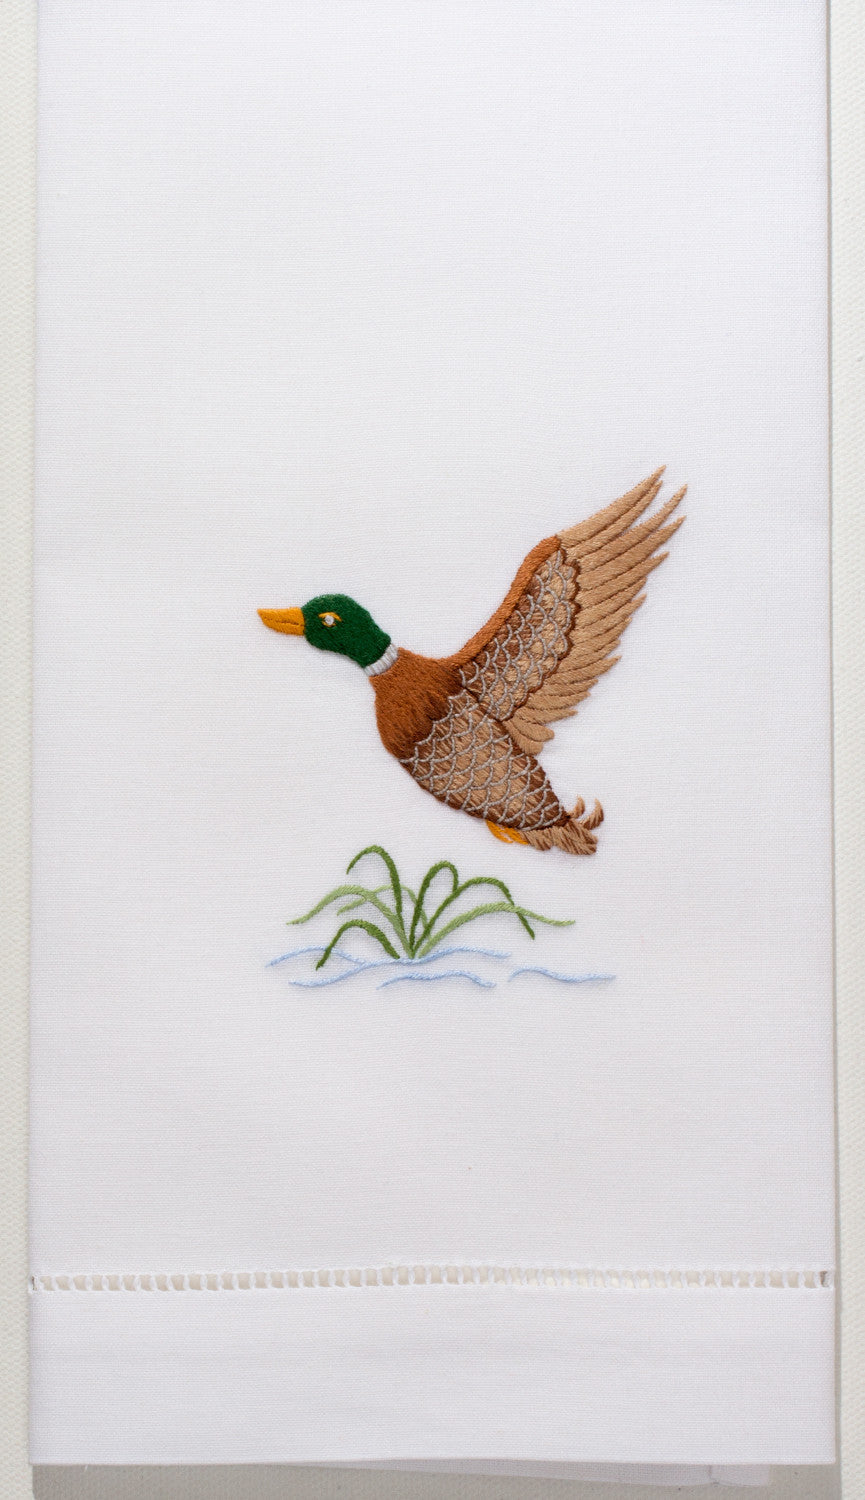 A detailed image of the embroidery -  A mallard flying above a little water with a green plant